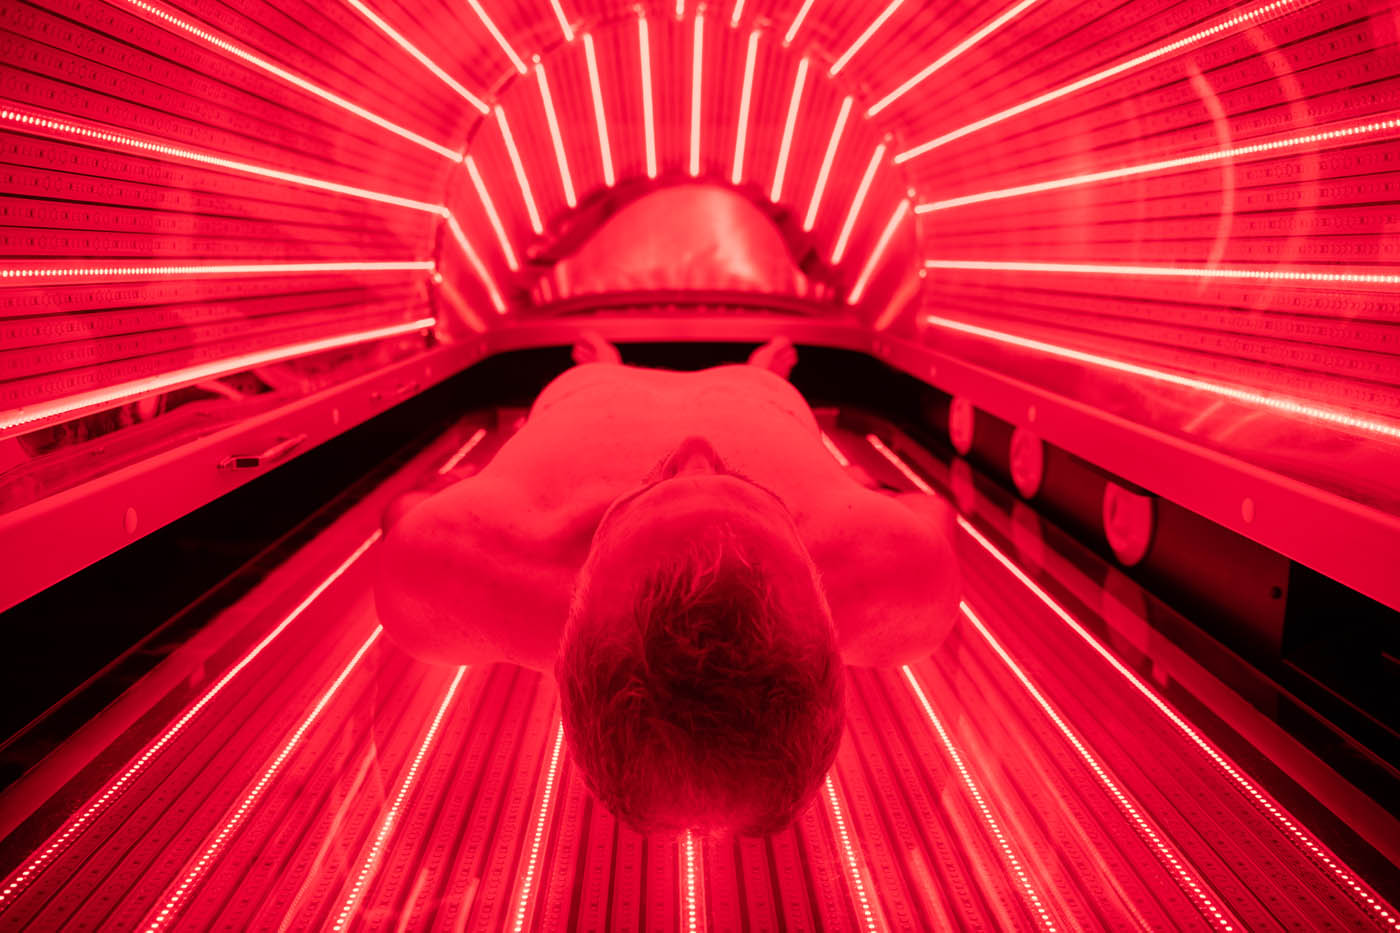 A man getting into a dark pod with bright red light, contact Light Lounge today for your infrared light therapy in Arvada.